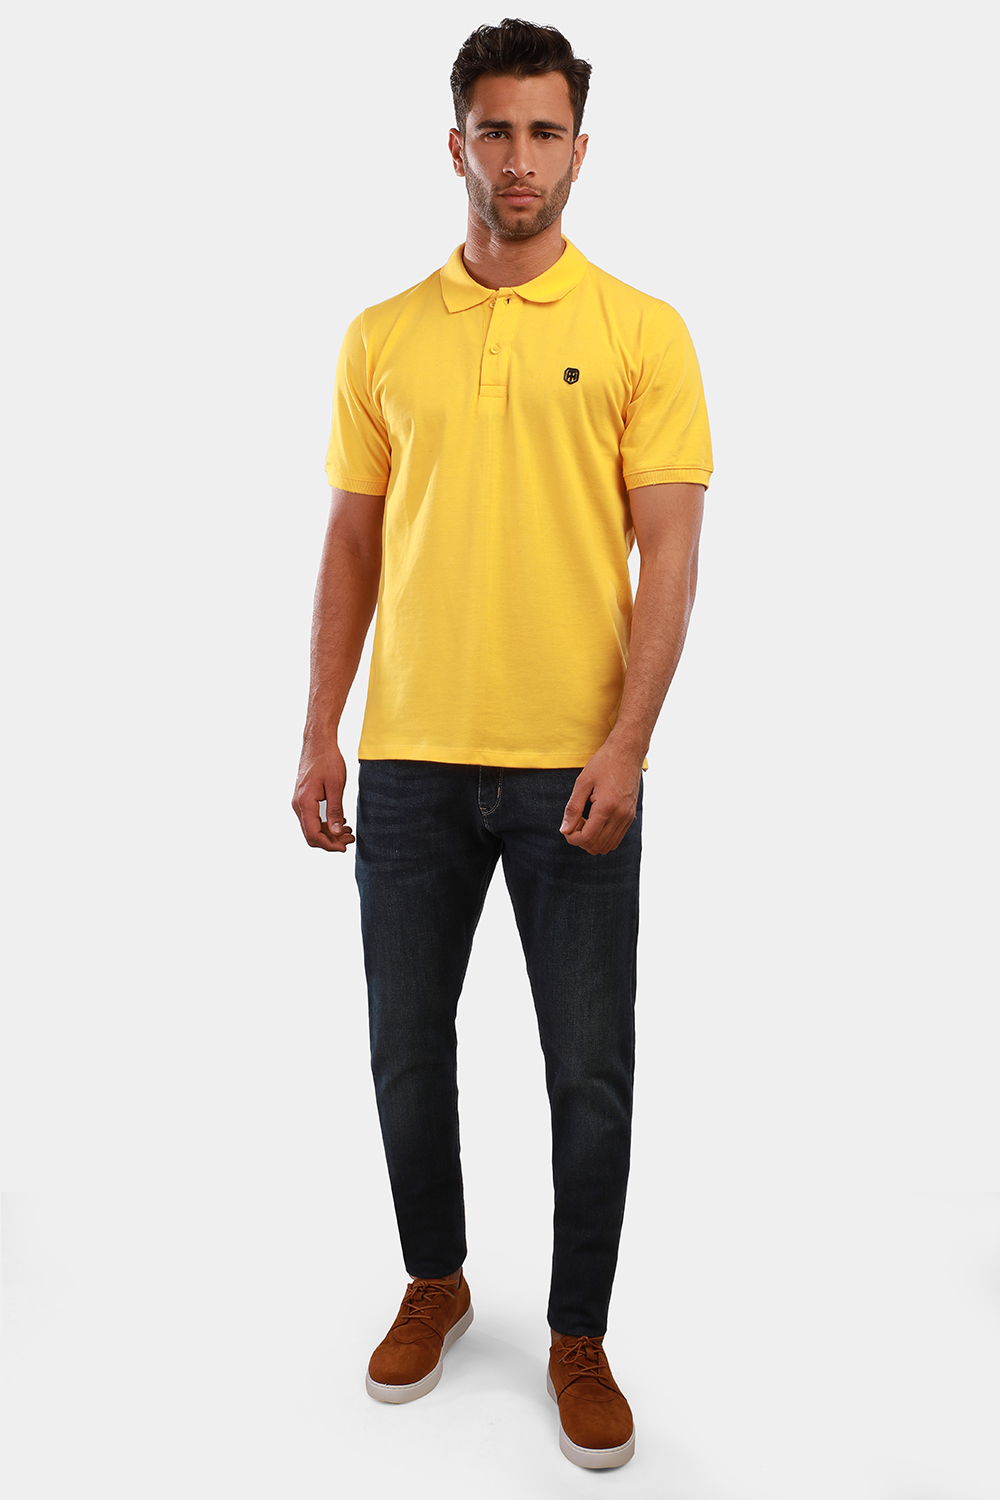 Polo Shirt New Fit Yellow - TIE HOUSE